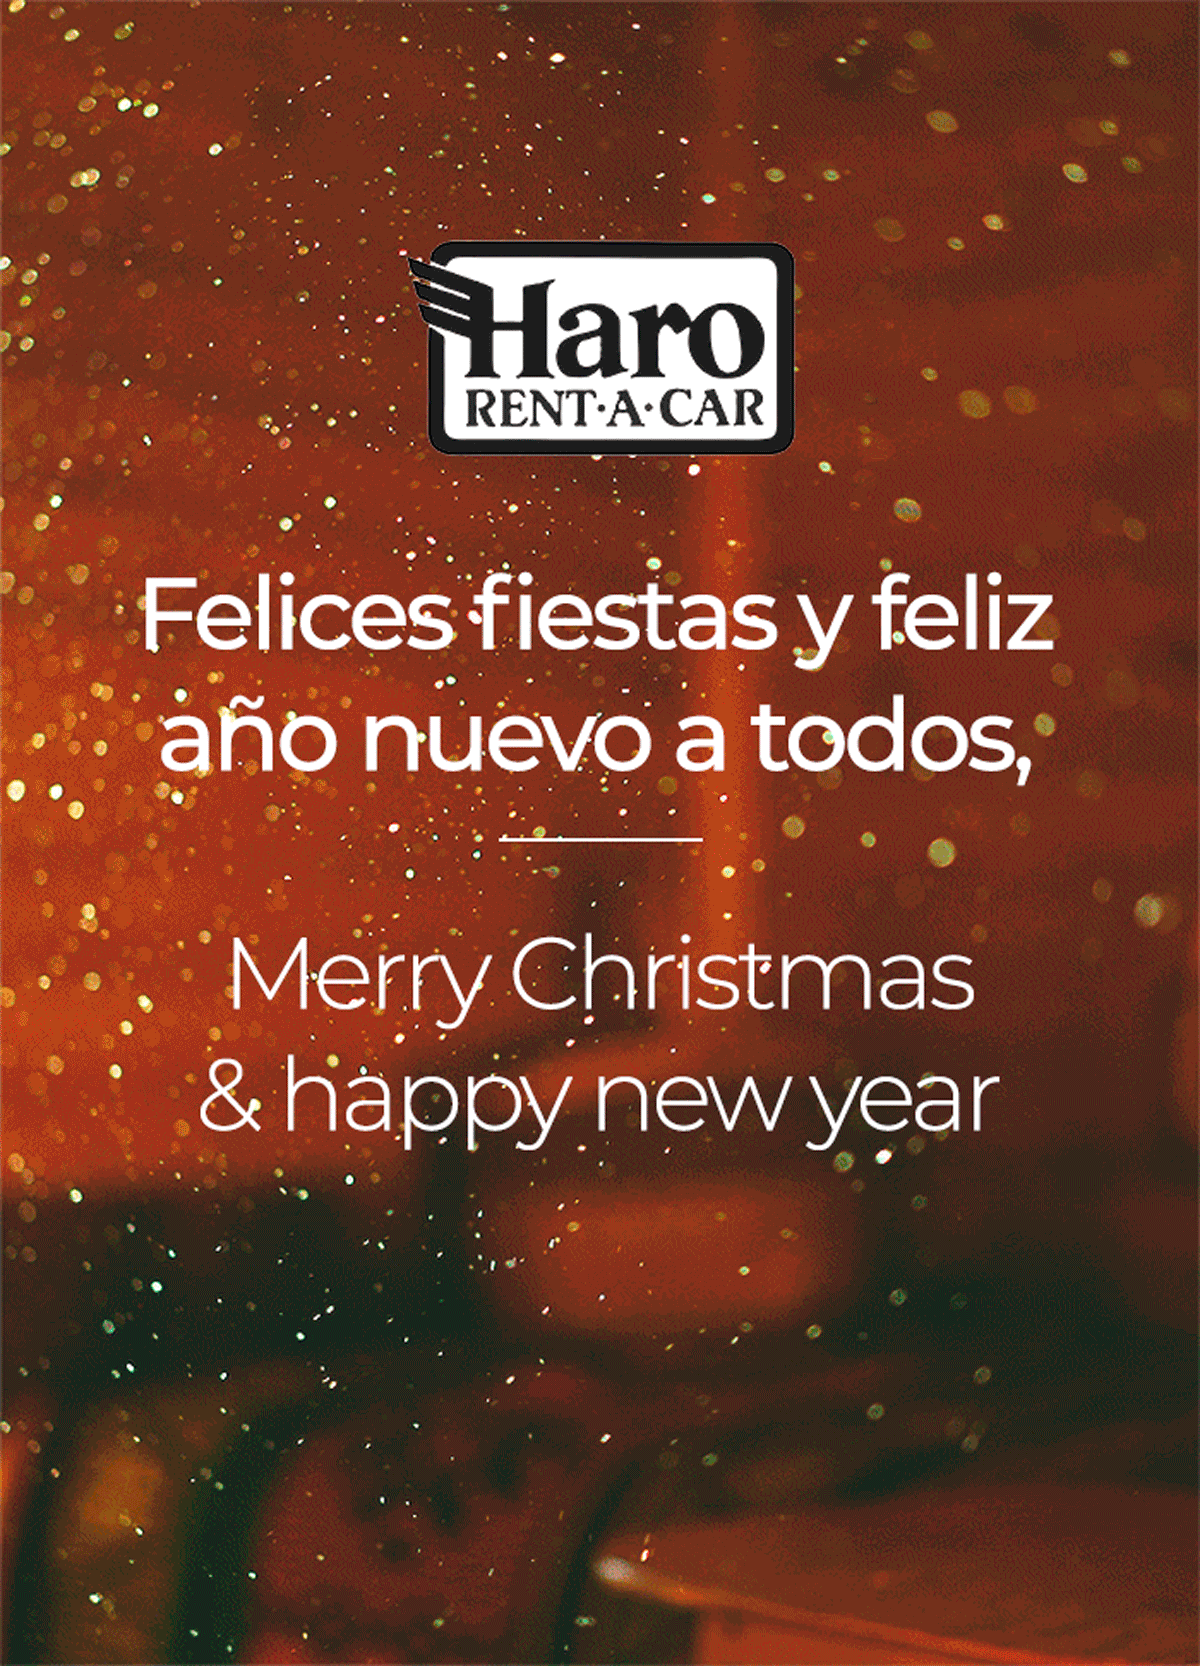 Merry Christmas & Happy New Year from Haro Rent A Car Estepona